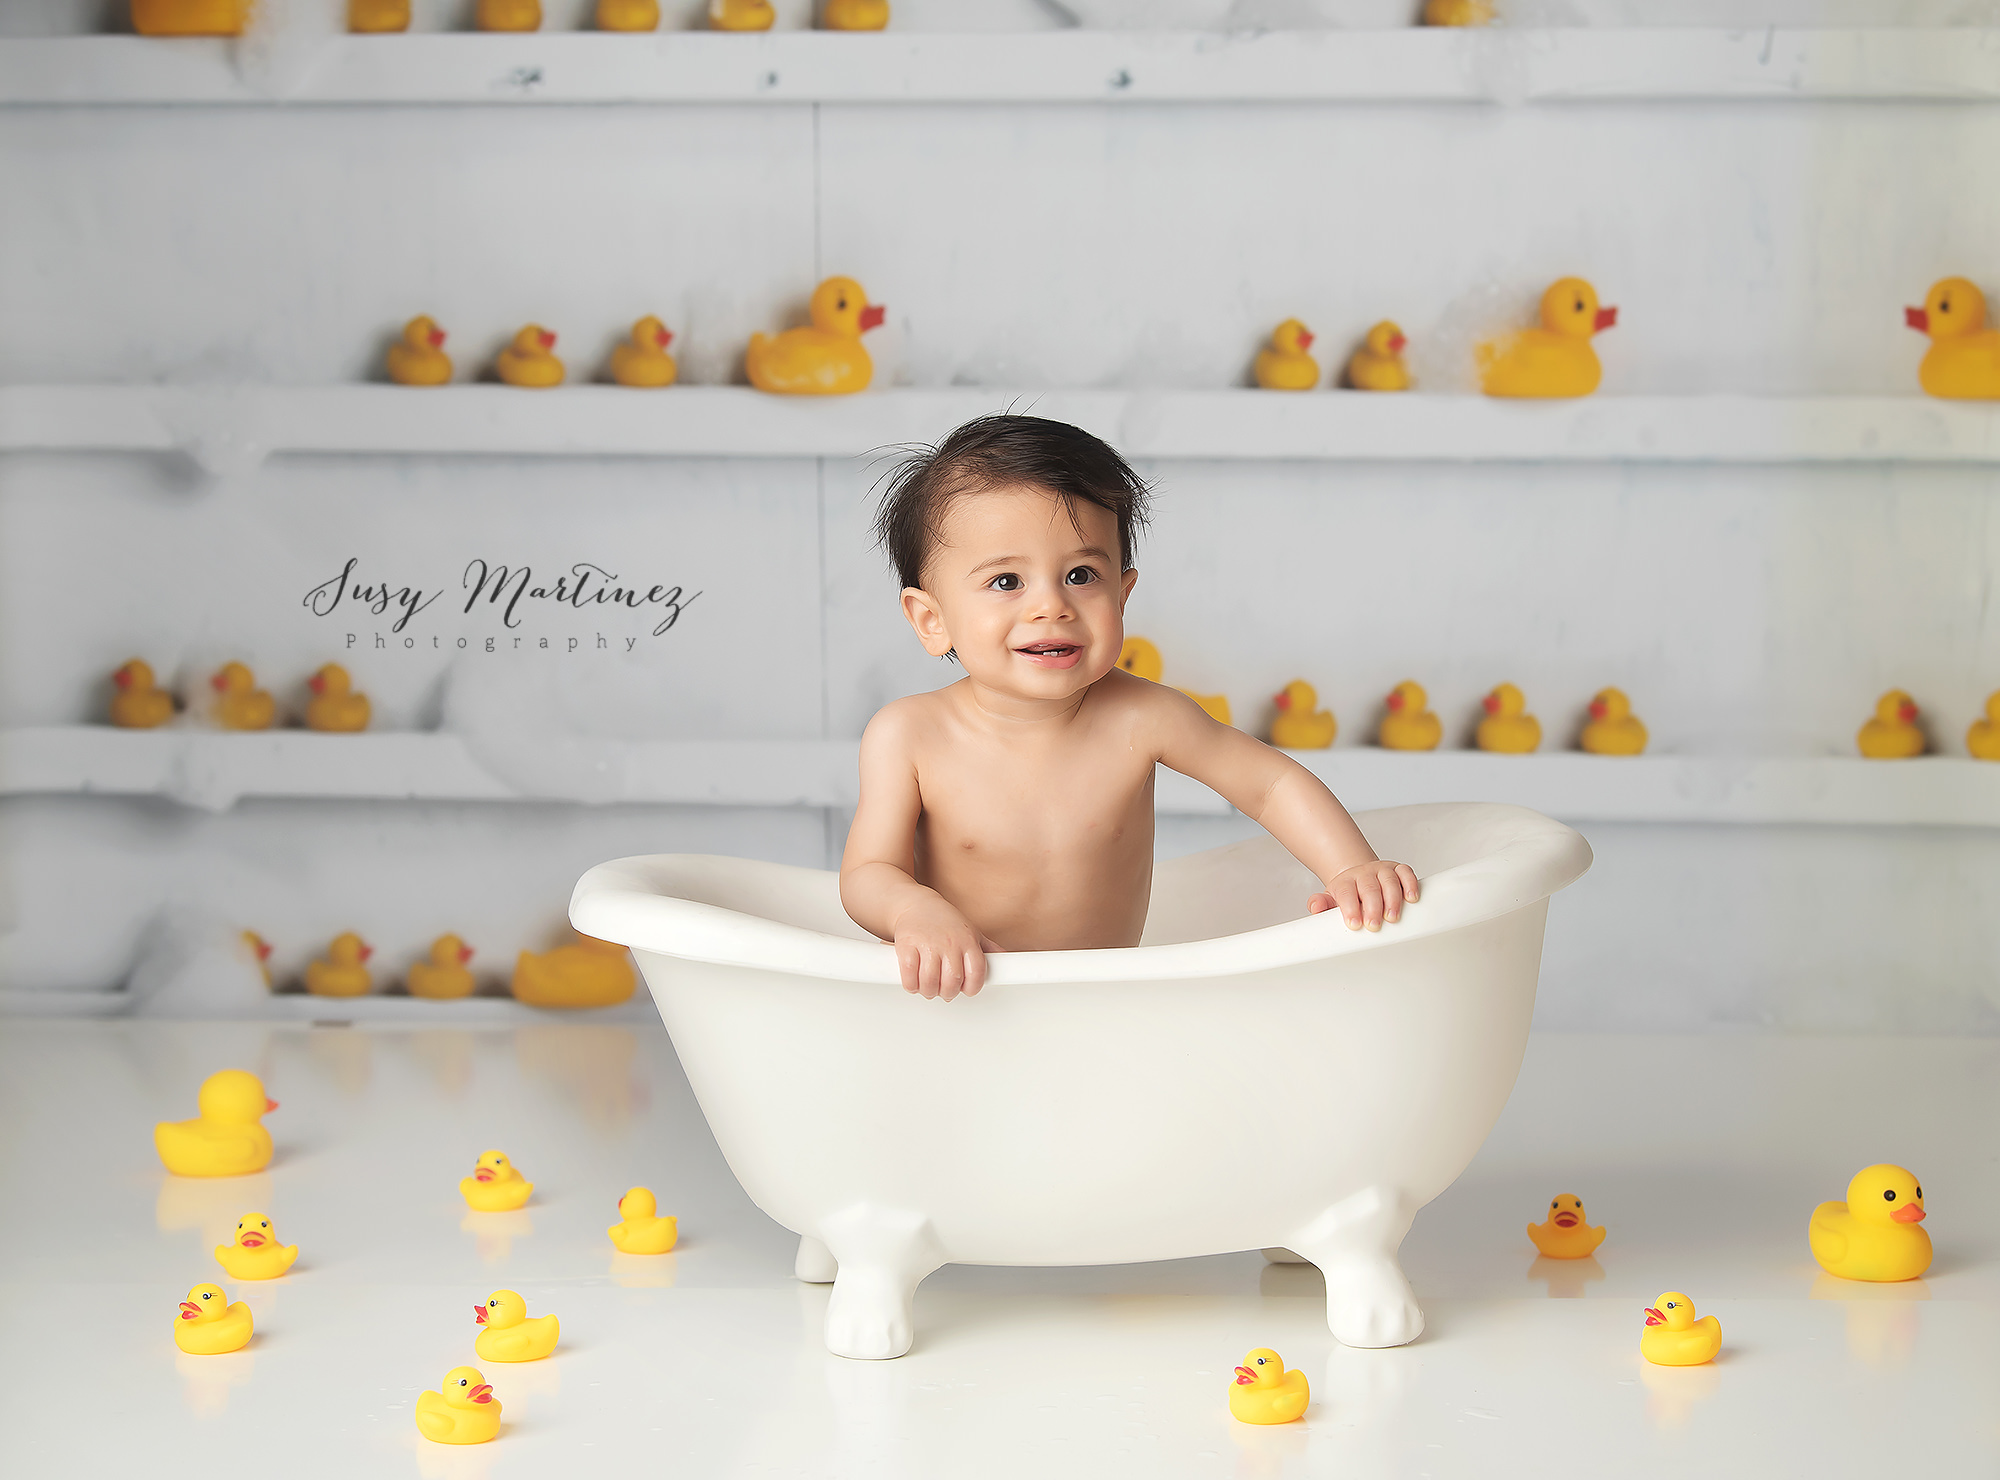 baby in tub with rubber ducks photographed by Susy Martinez Photography